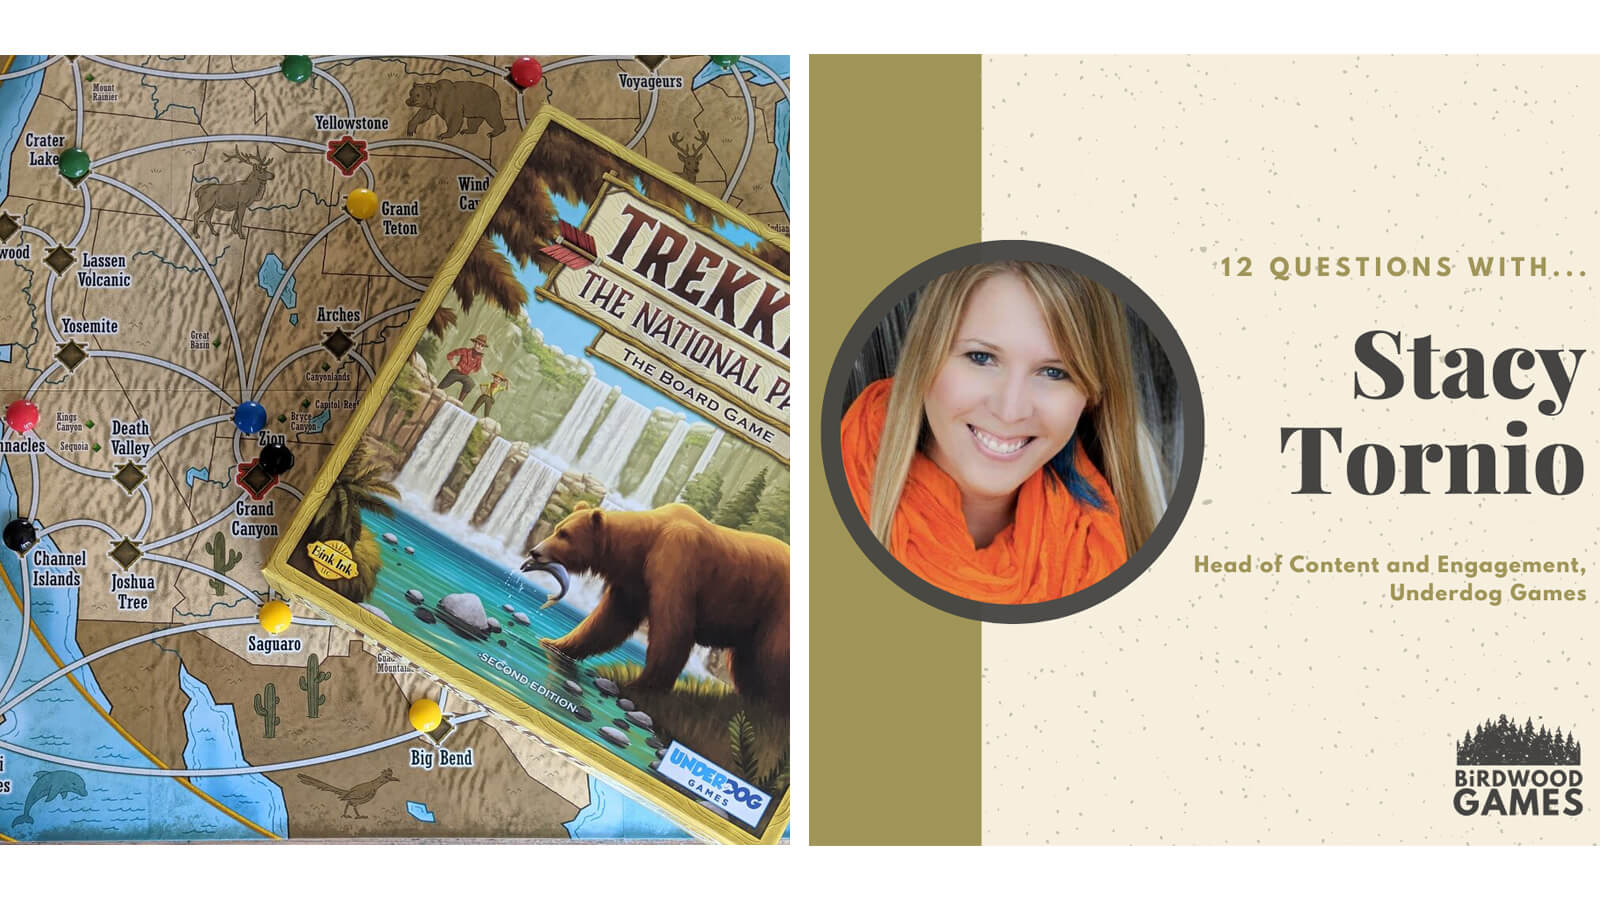 “I didn’t expect to land in the board game industry”: 12 Questions with Stacy Tornio